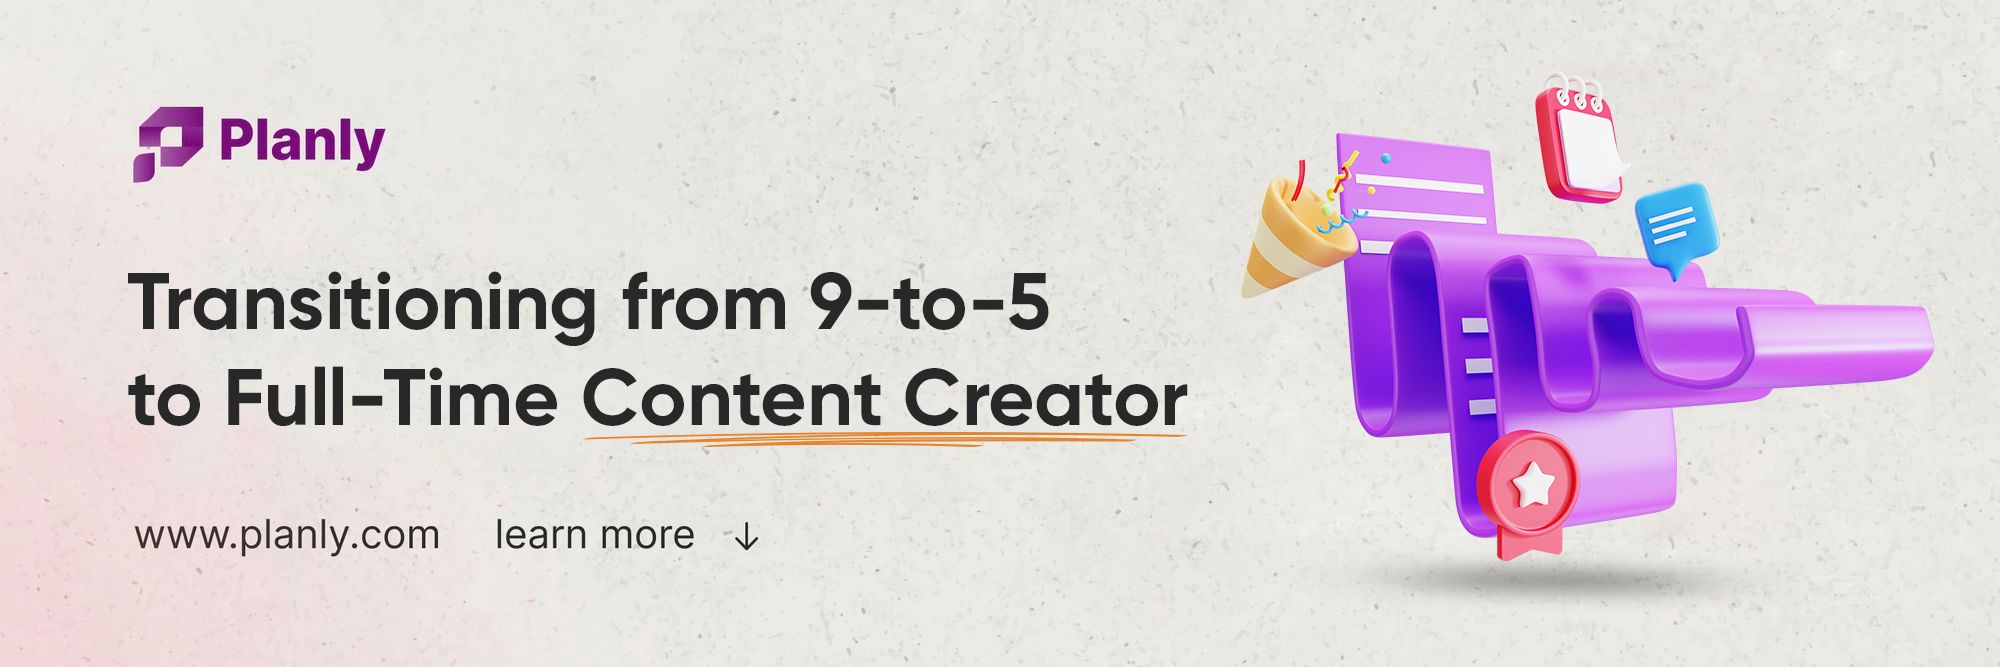 What to Do Before You Quit 9to5 Job to Full-Time Content Creator?